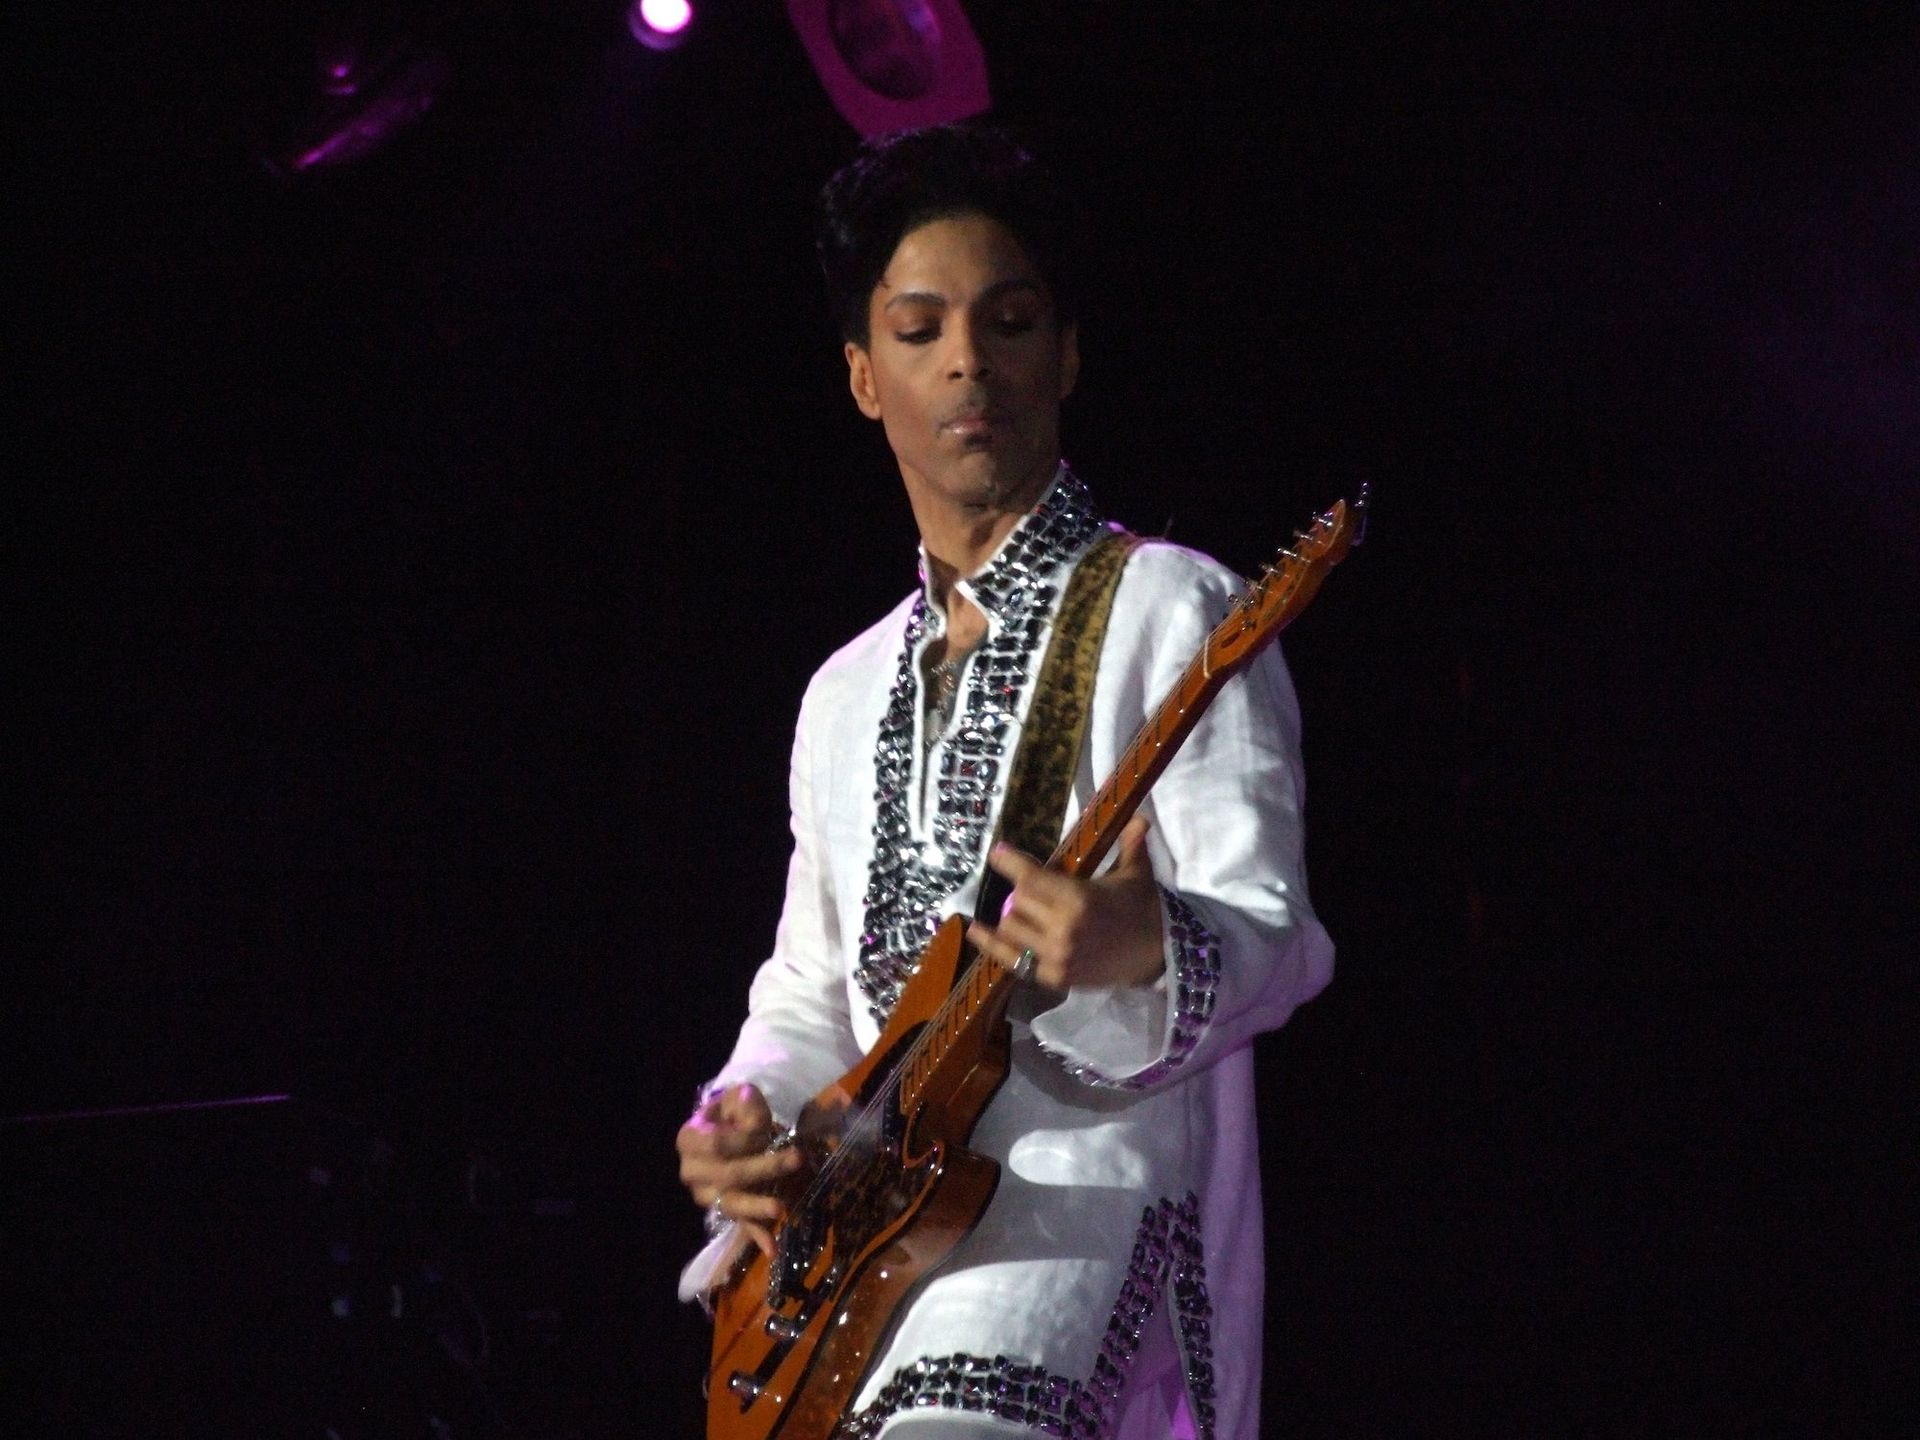 Prince performing at Coachella in 2008. Photo by Scott Penner, via Flickr